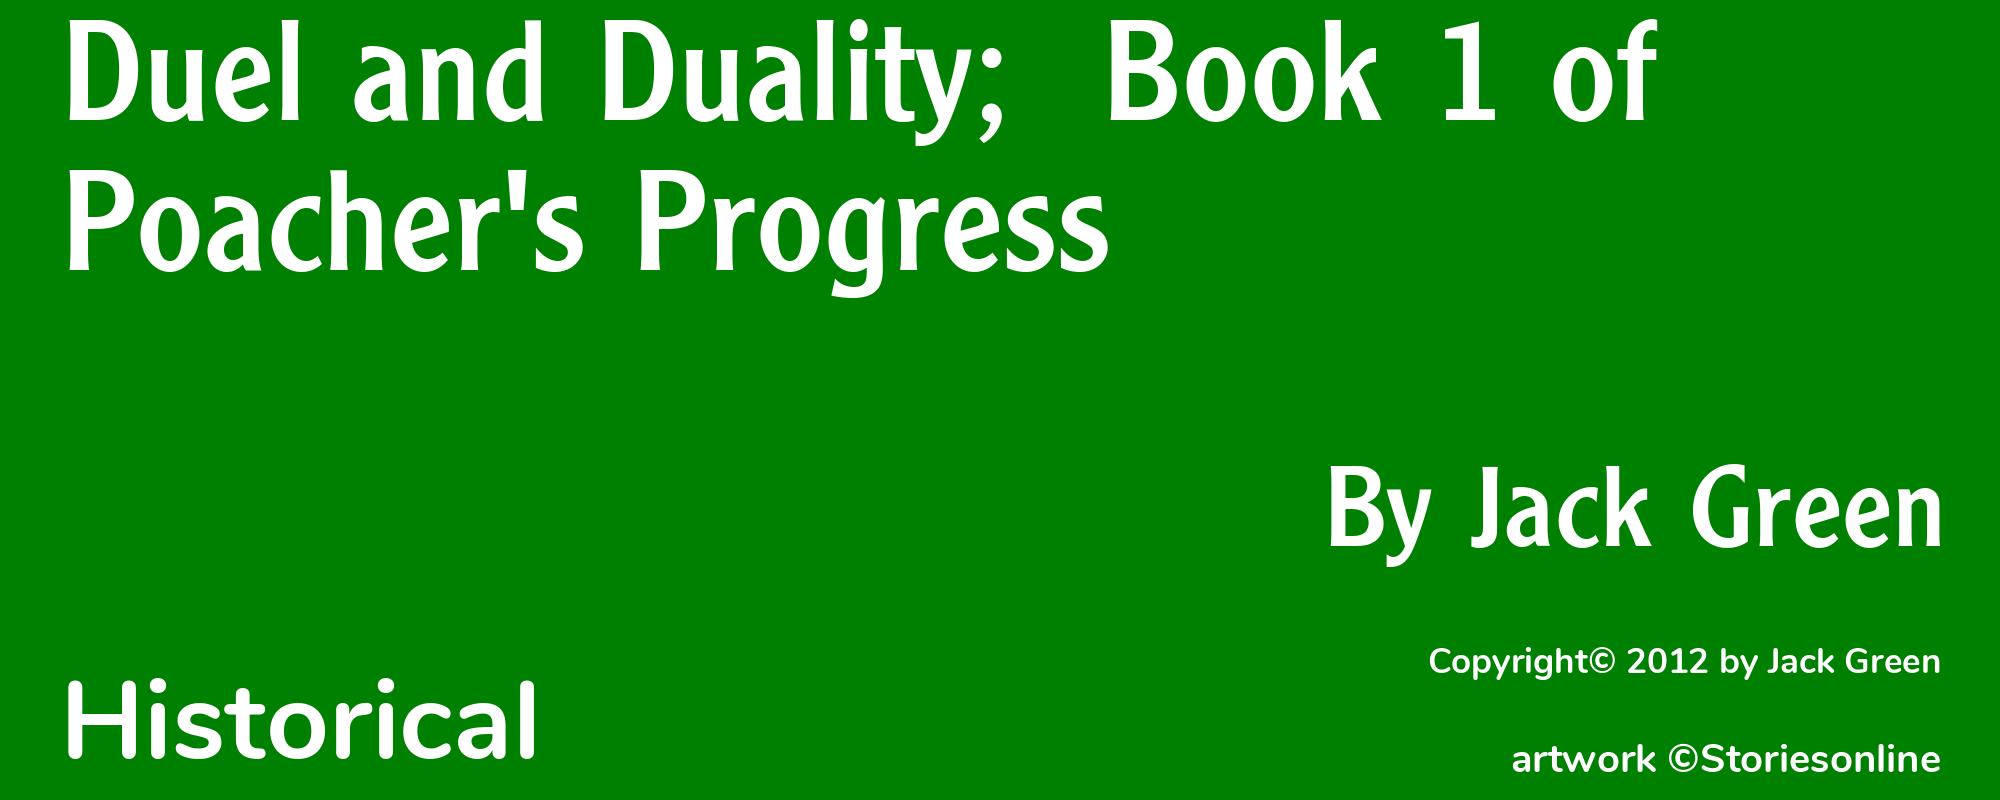 Duel and Duality;  Book 1 of Poacher's Progress - Cover